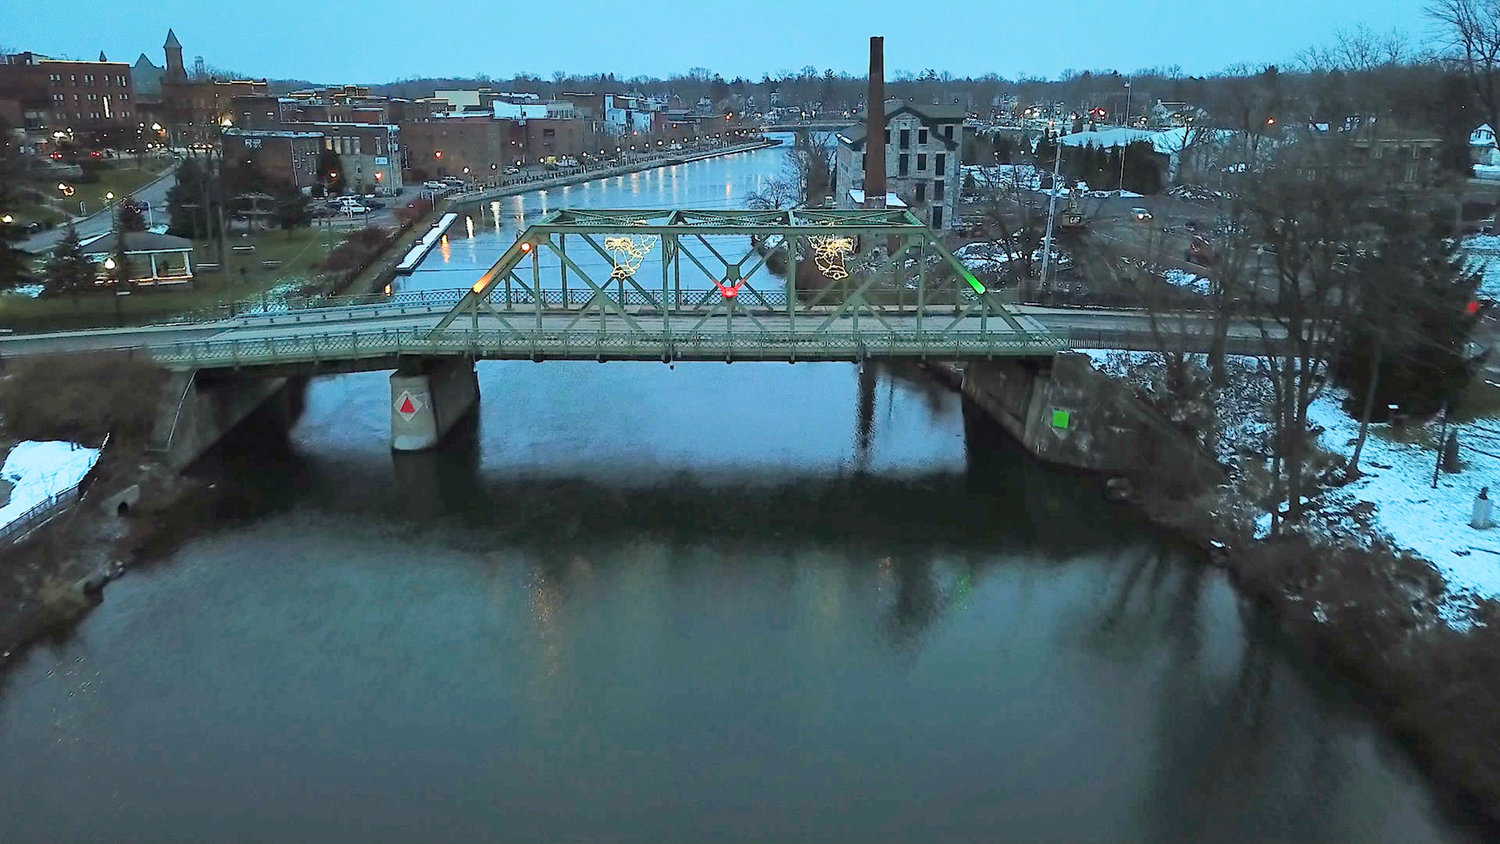 A BRIDGE OF NOTORIETY — Here is the Bridge Street Bridge in Seneca Falls, believed to be the bridge Frank Capra actually depicted in the film, “It’s a Wonderful Life,” that character George Bailey jumped from to save Clarence the Angel. (Photo submitted)